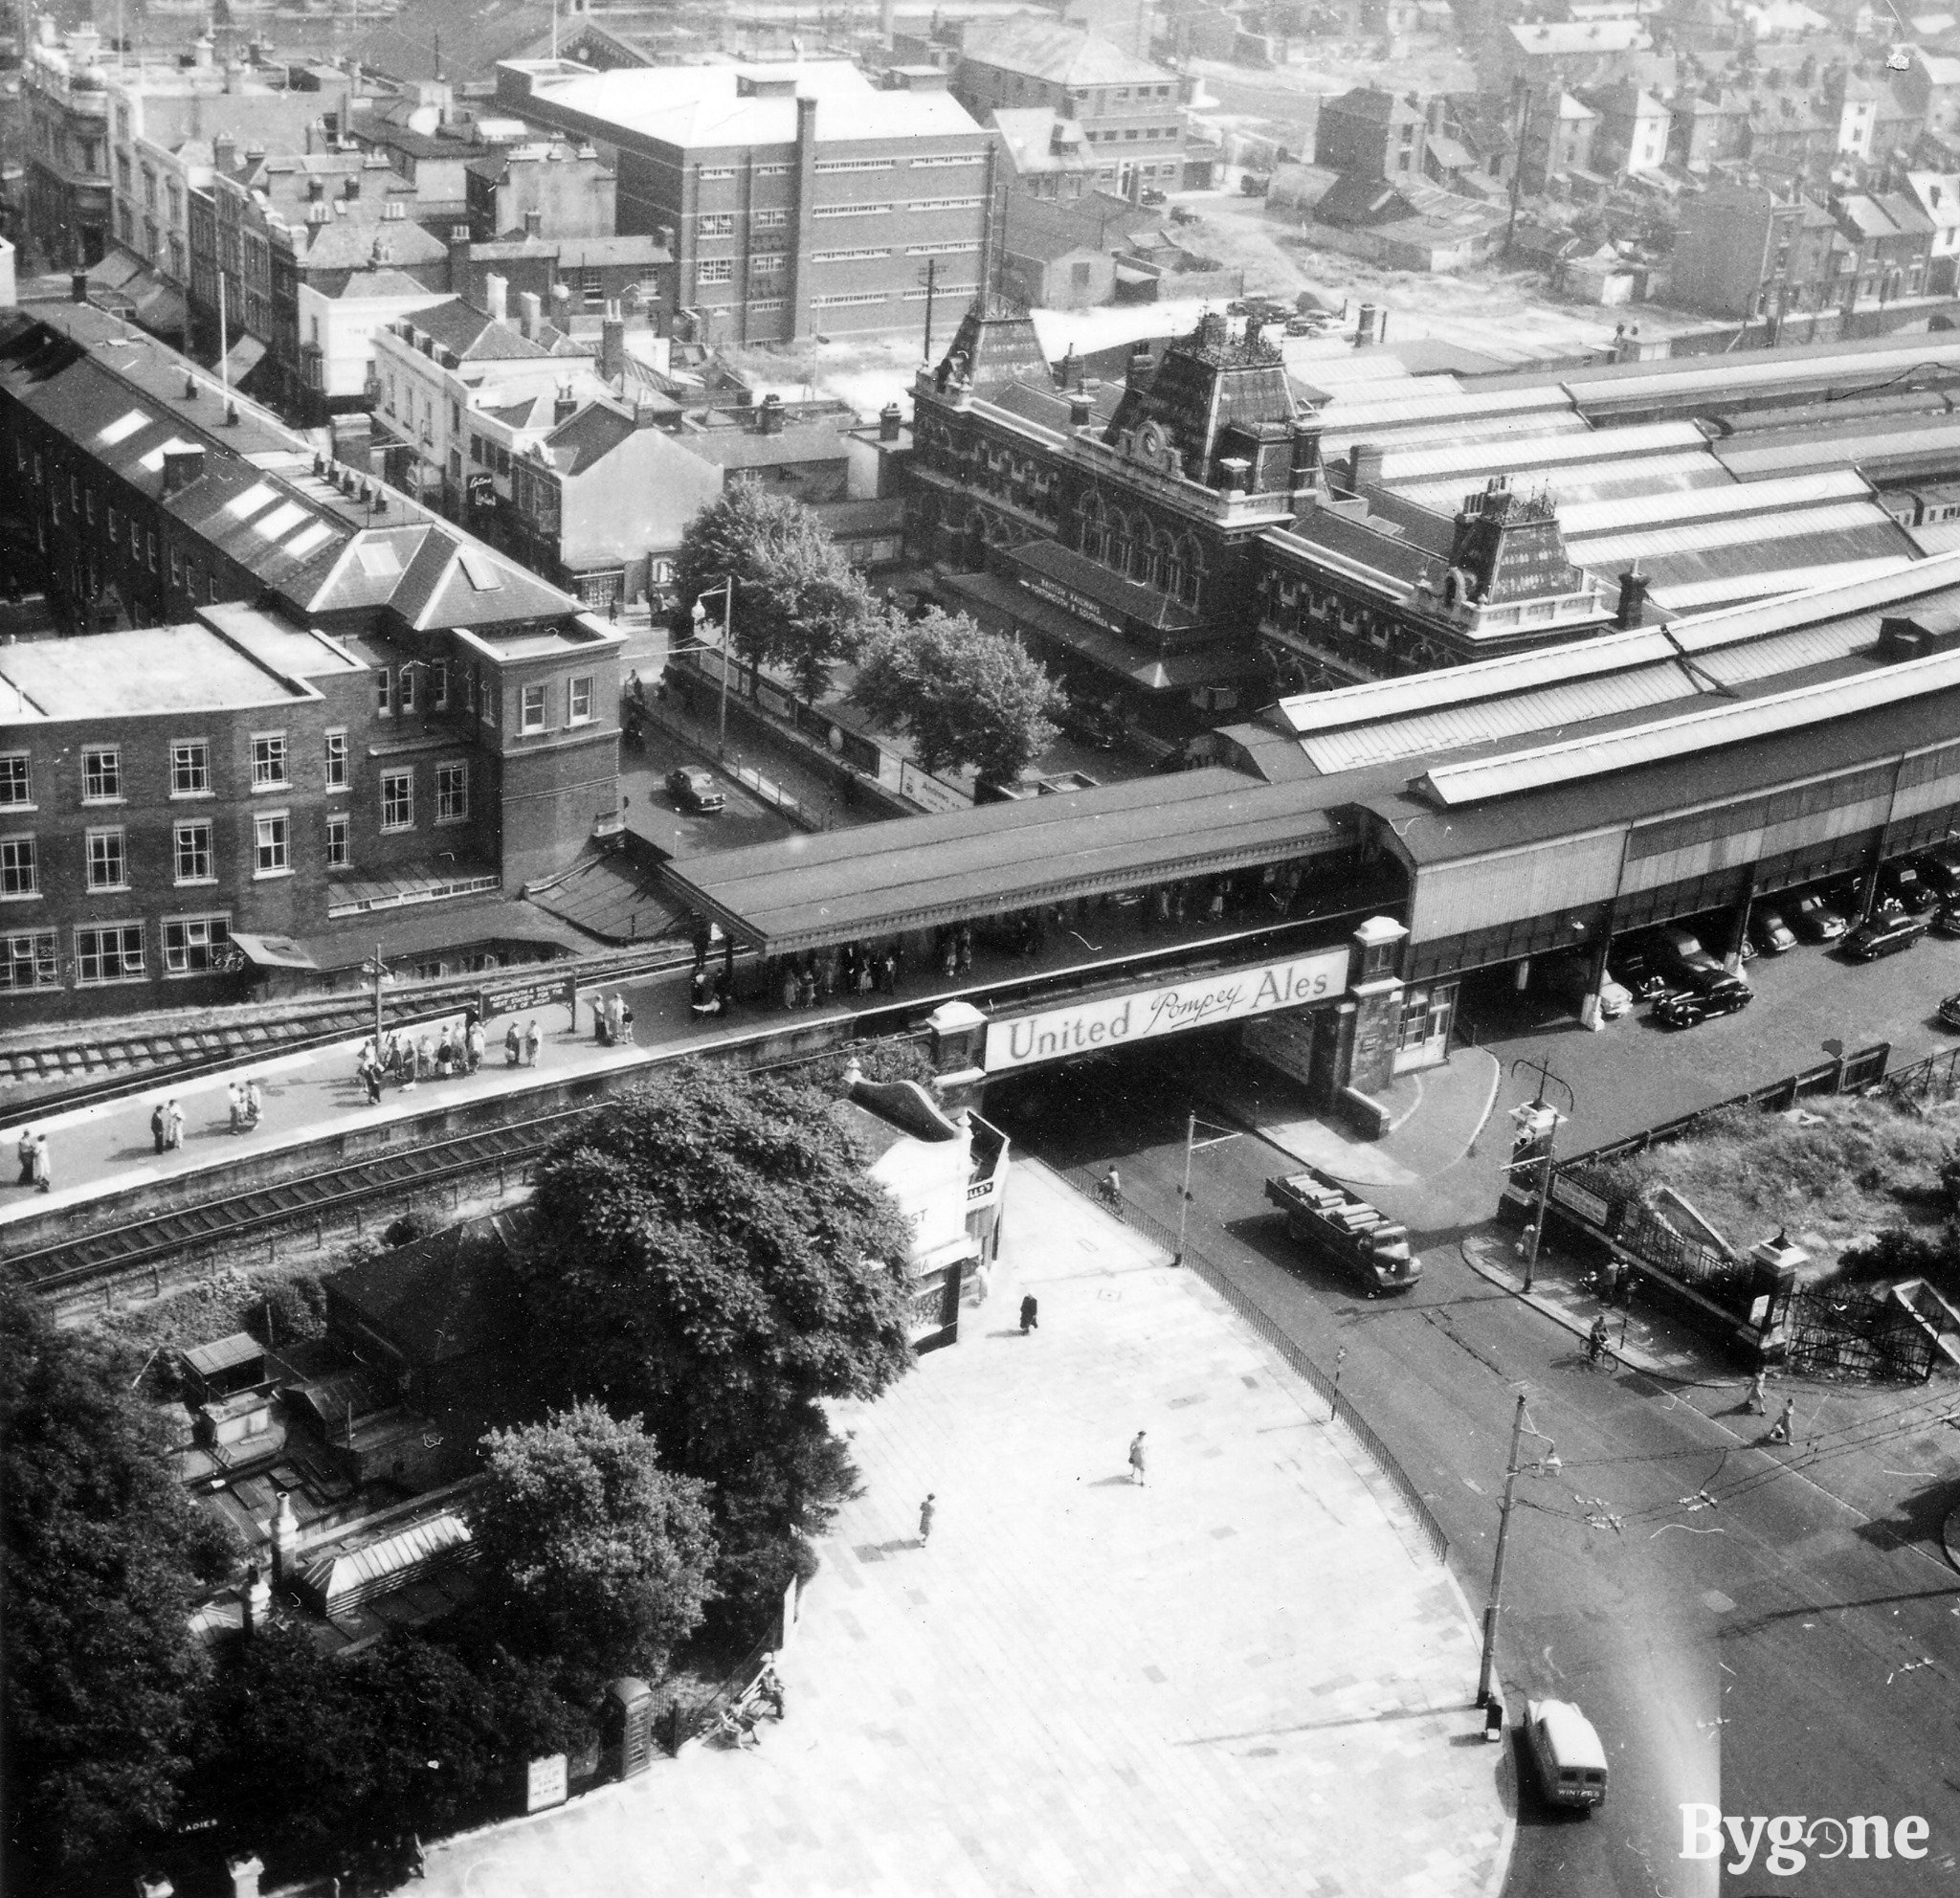 Portsmouth and Southsea station from the air